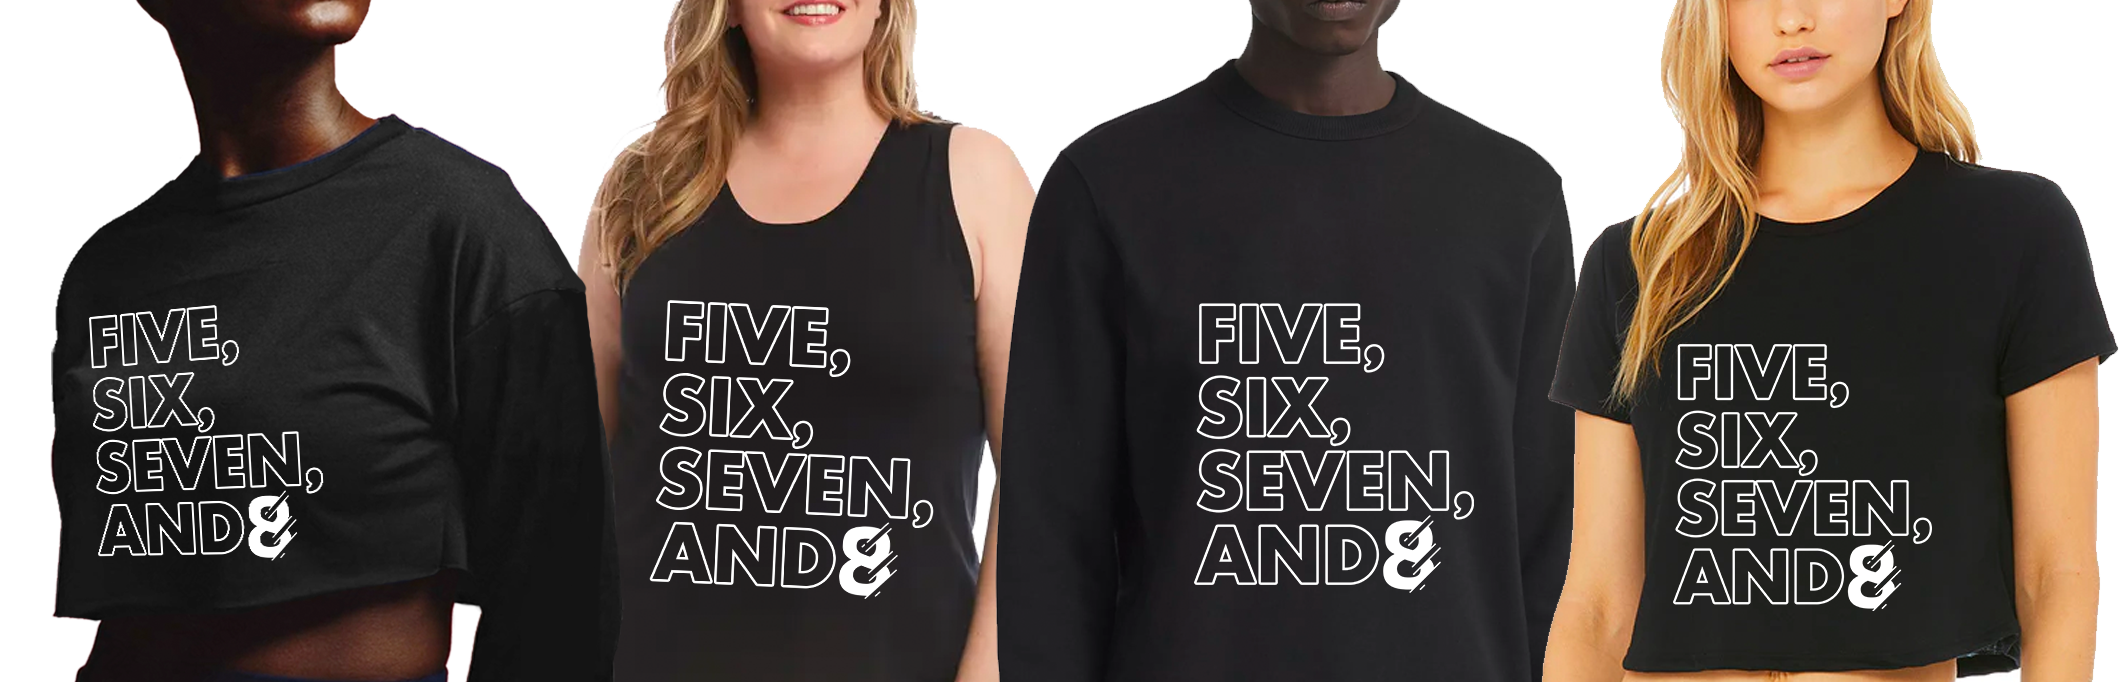 merch - AND8 FITNESS